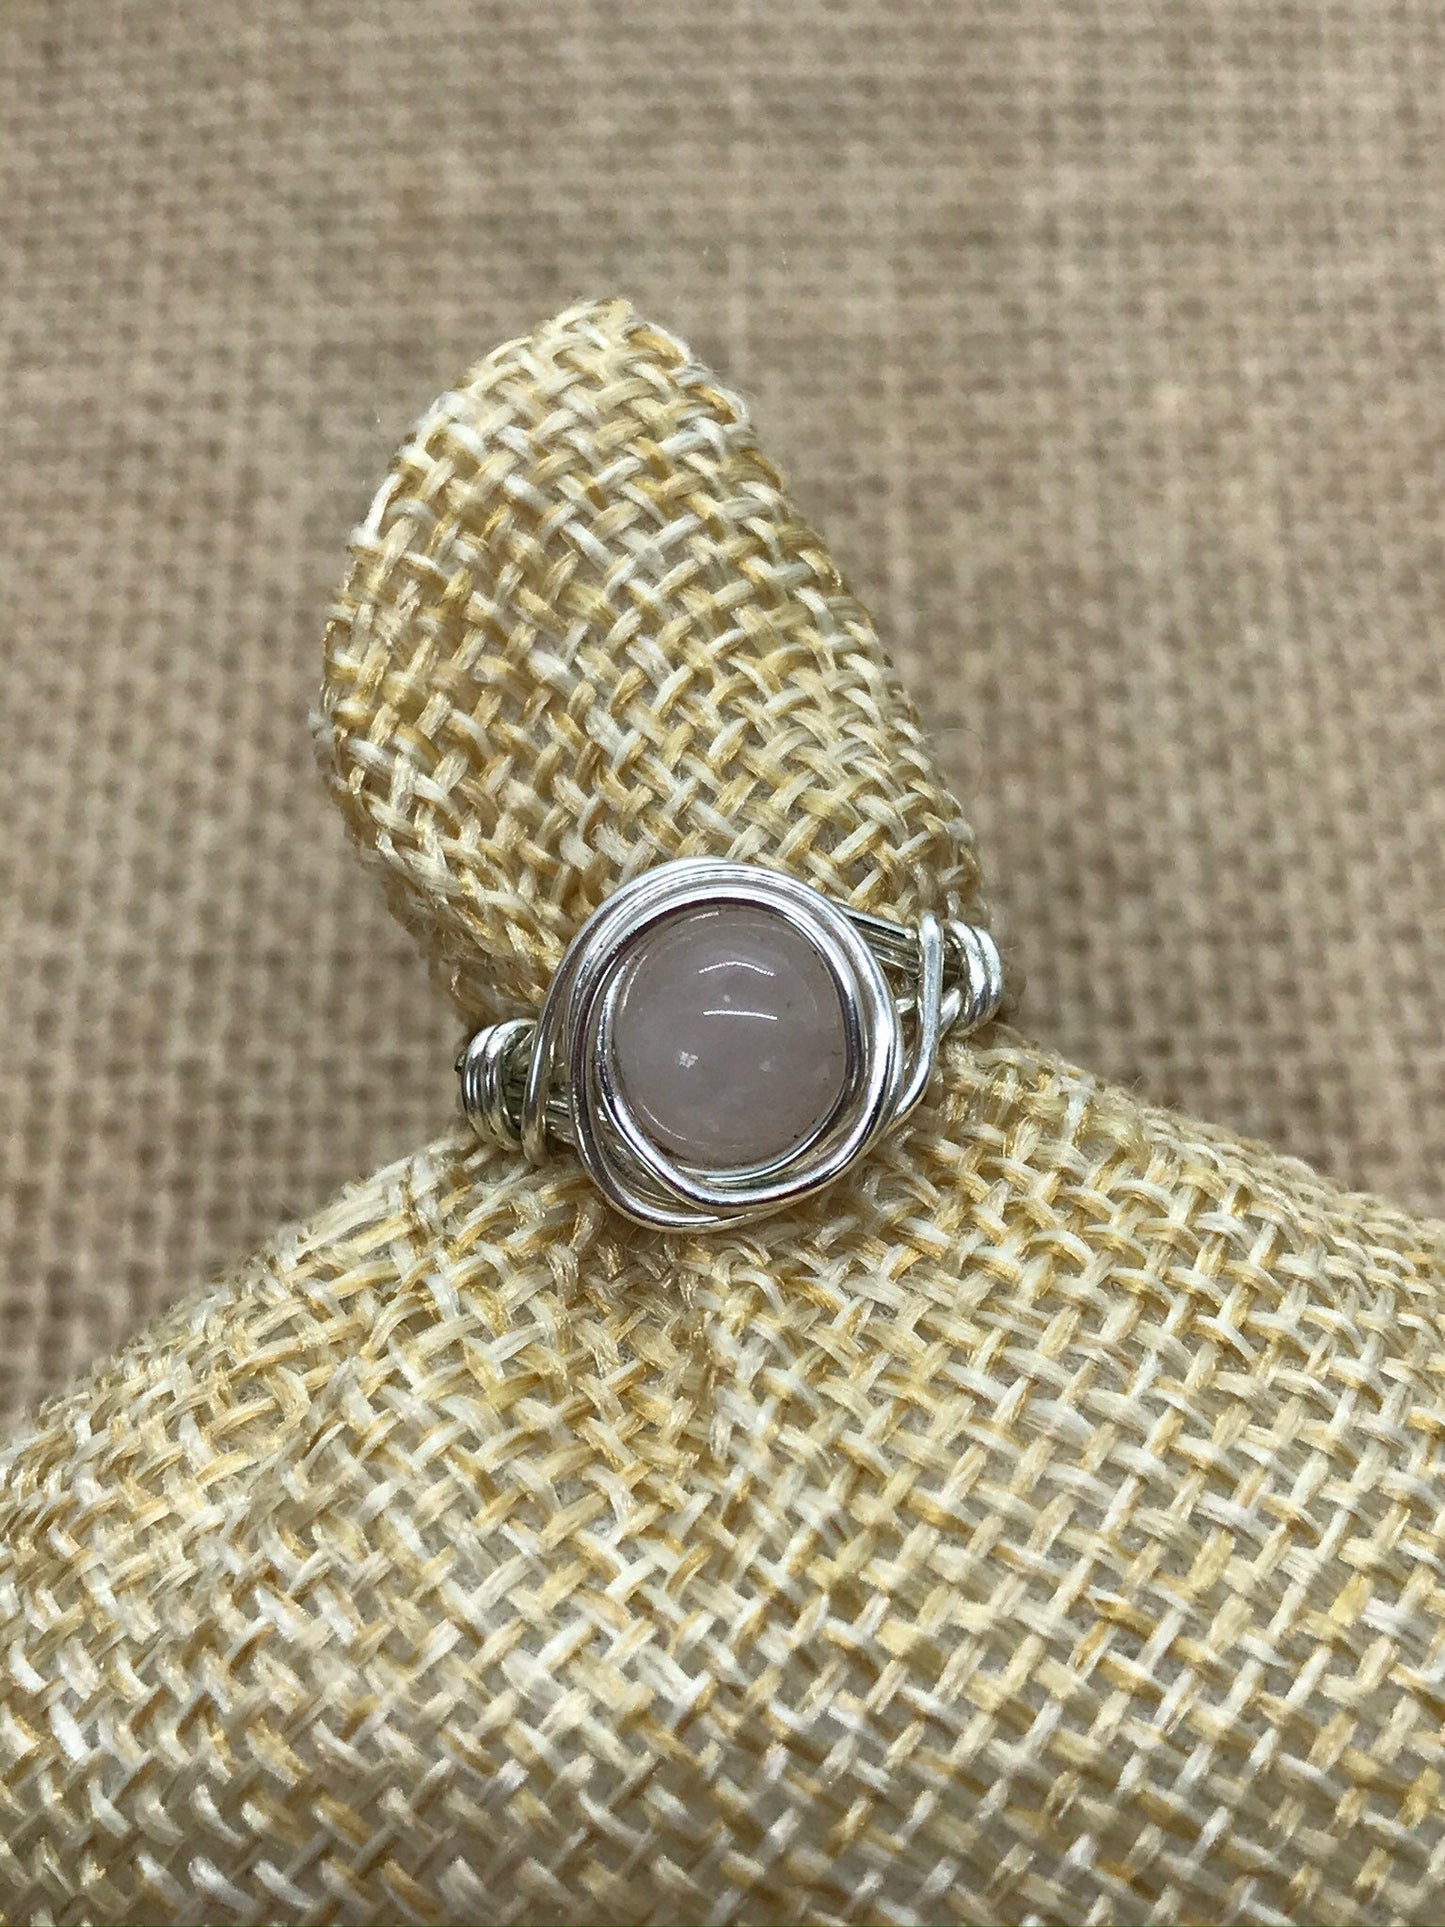 Rose Quartz Wire Wrapped Ring